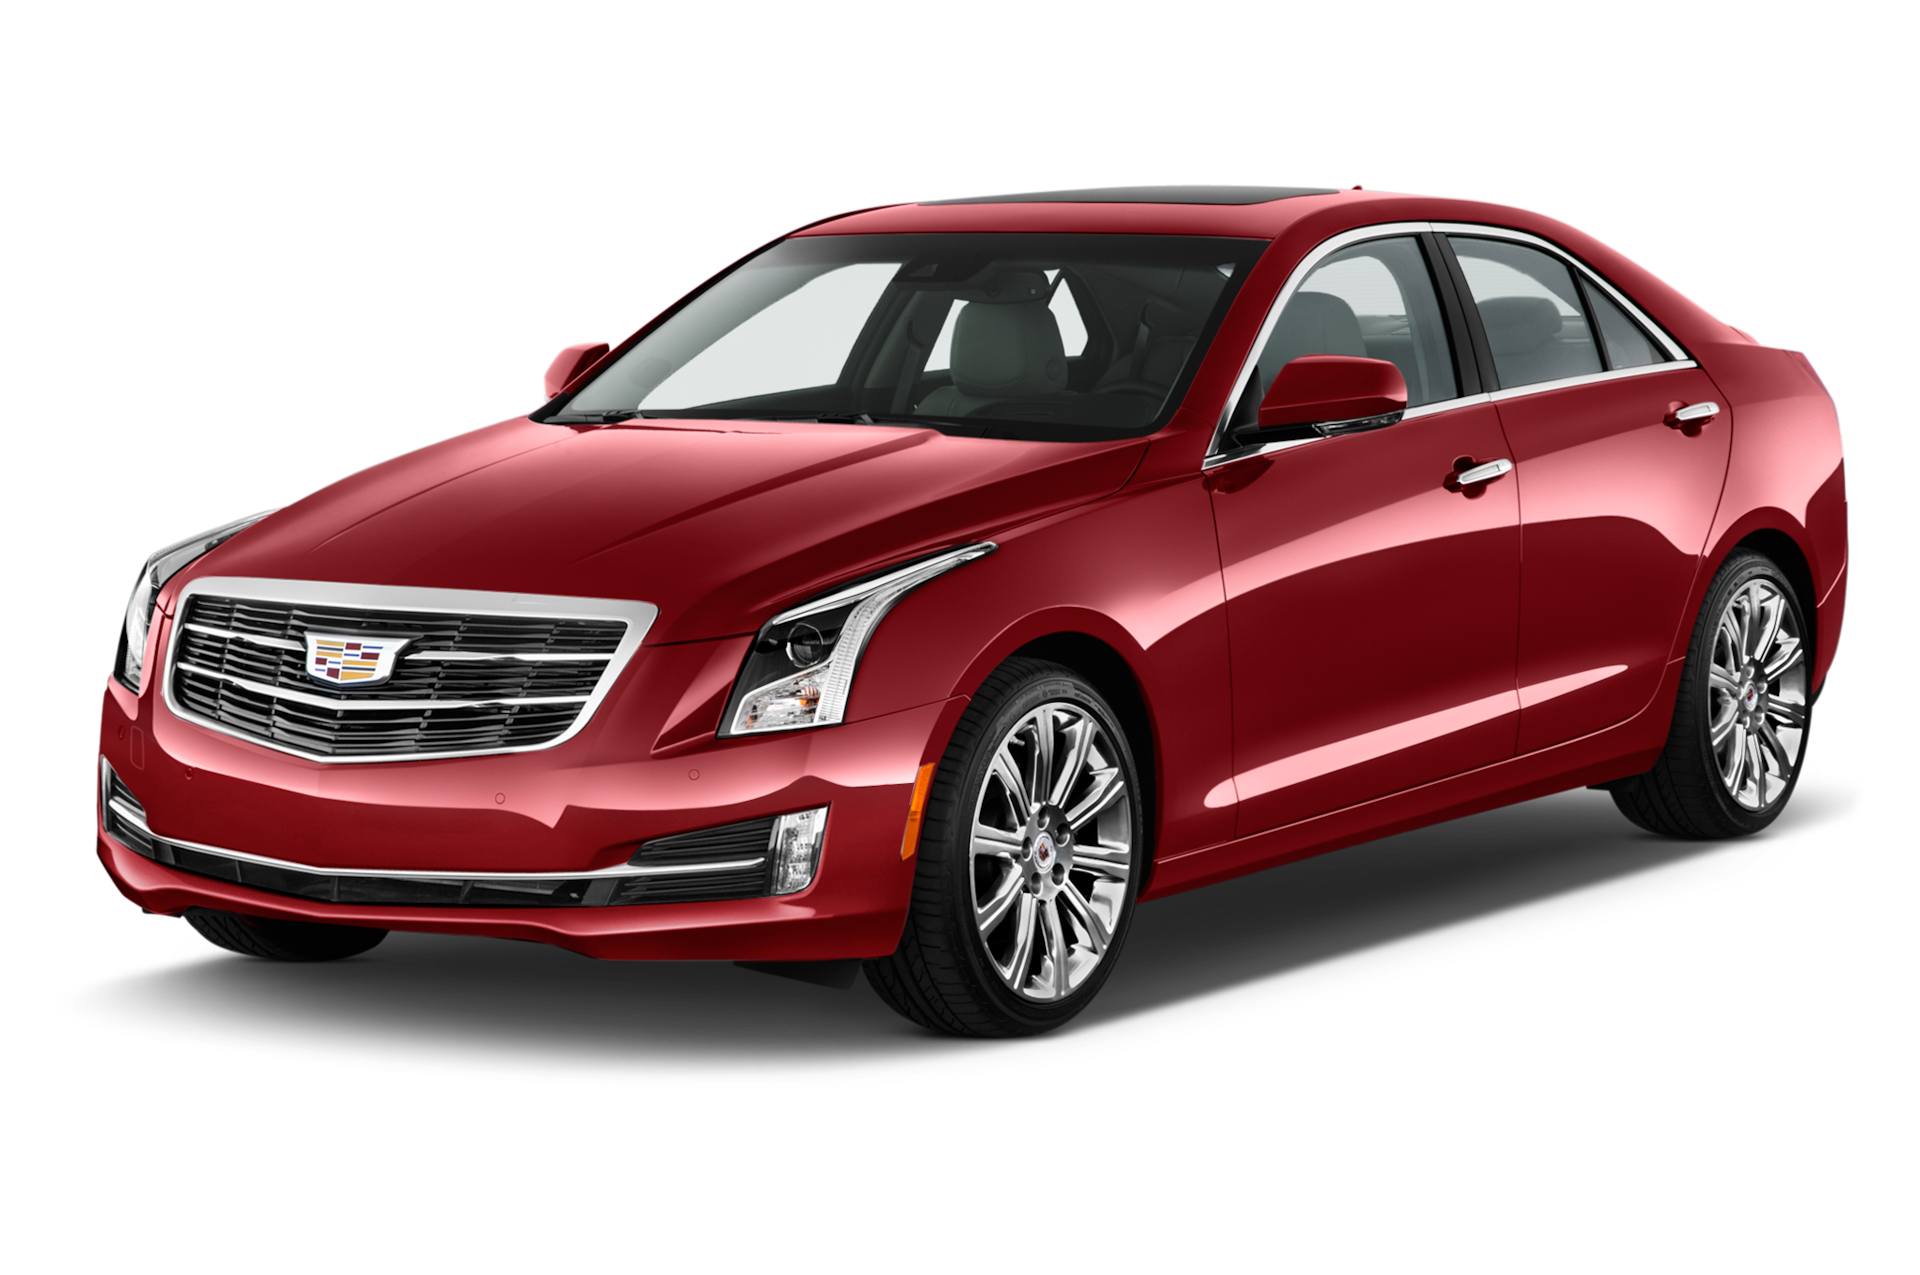 2015 Cadillac ATS Prices, Reviews, and Photos - MotorTrend